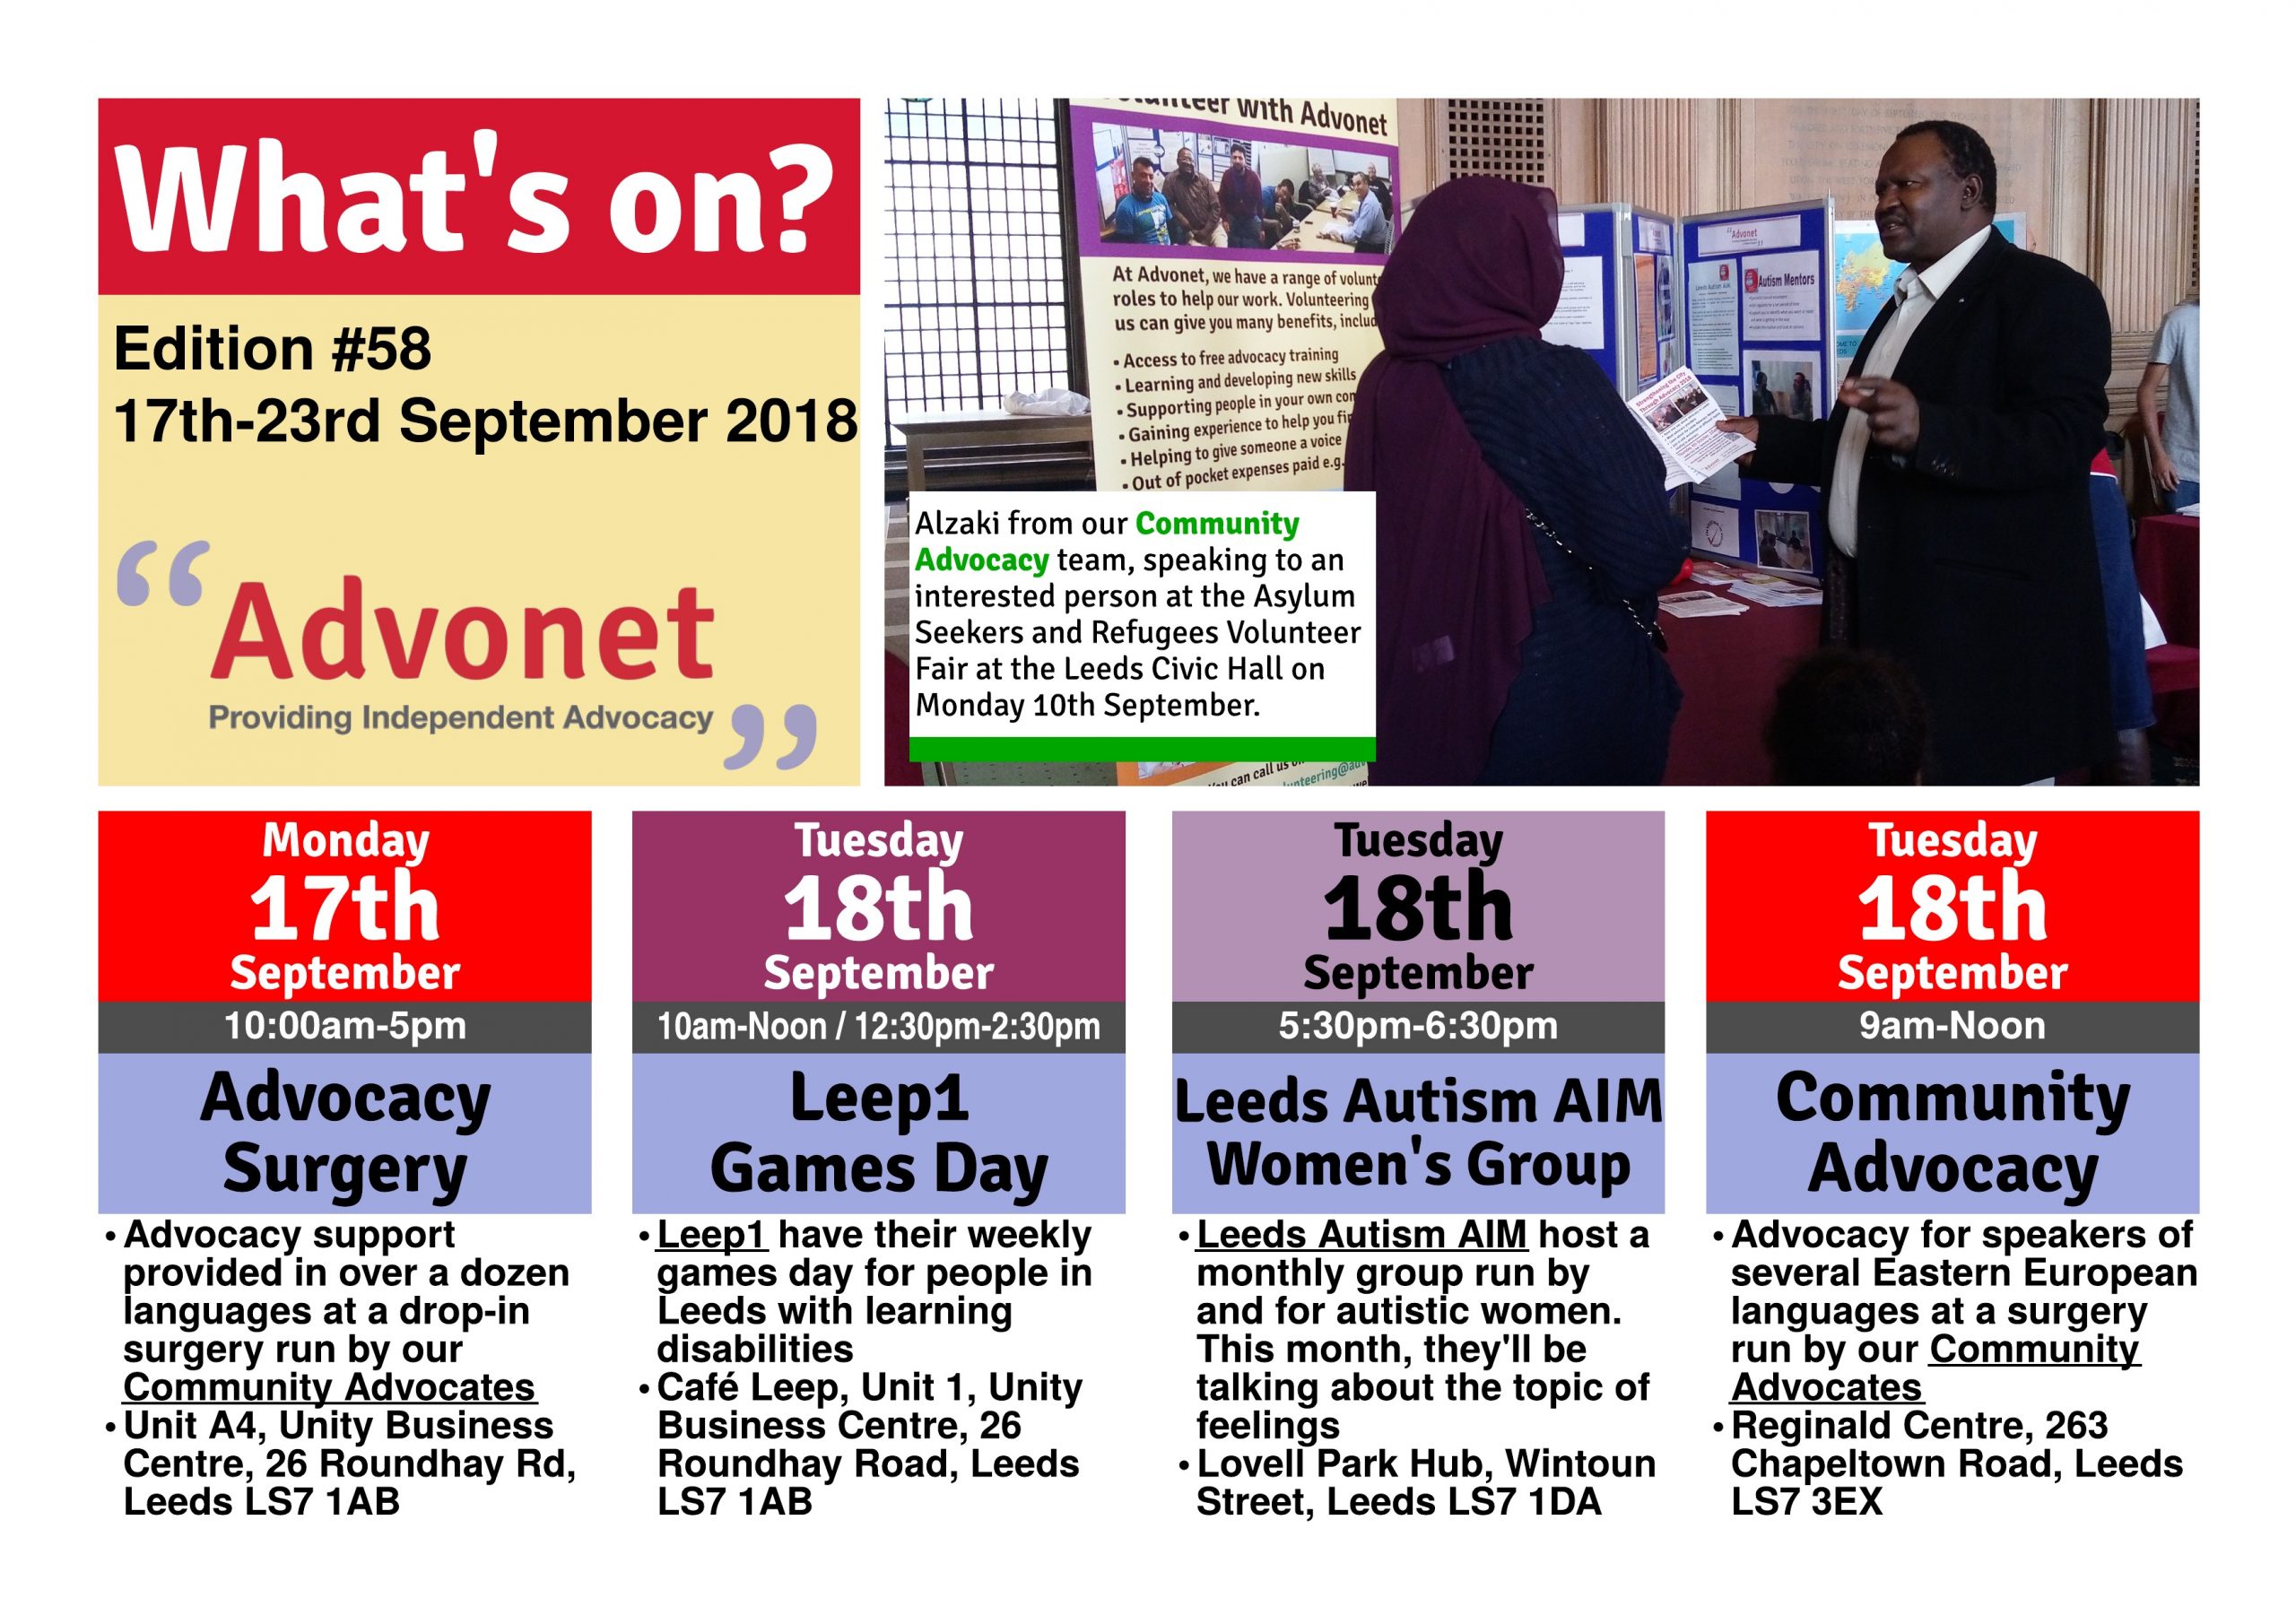 What's On - 17th-23rd September 2018